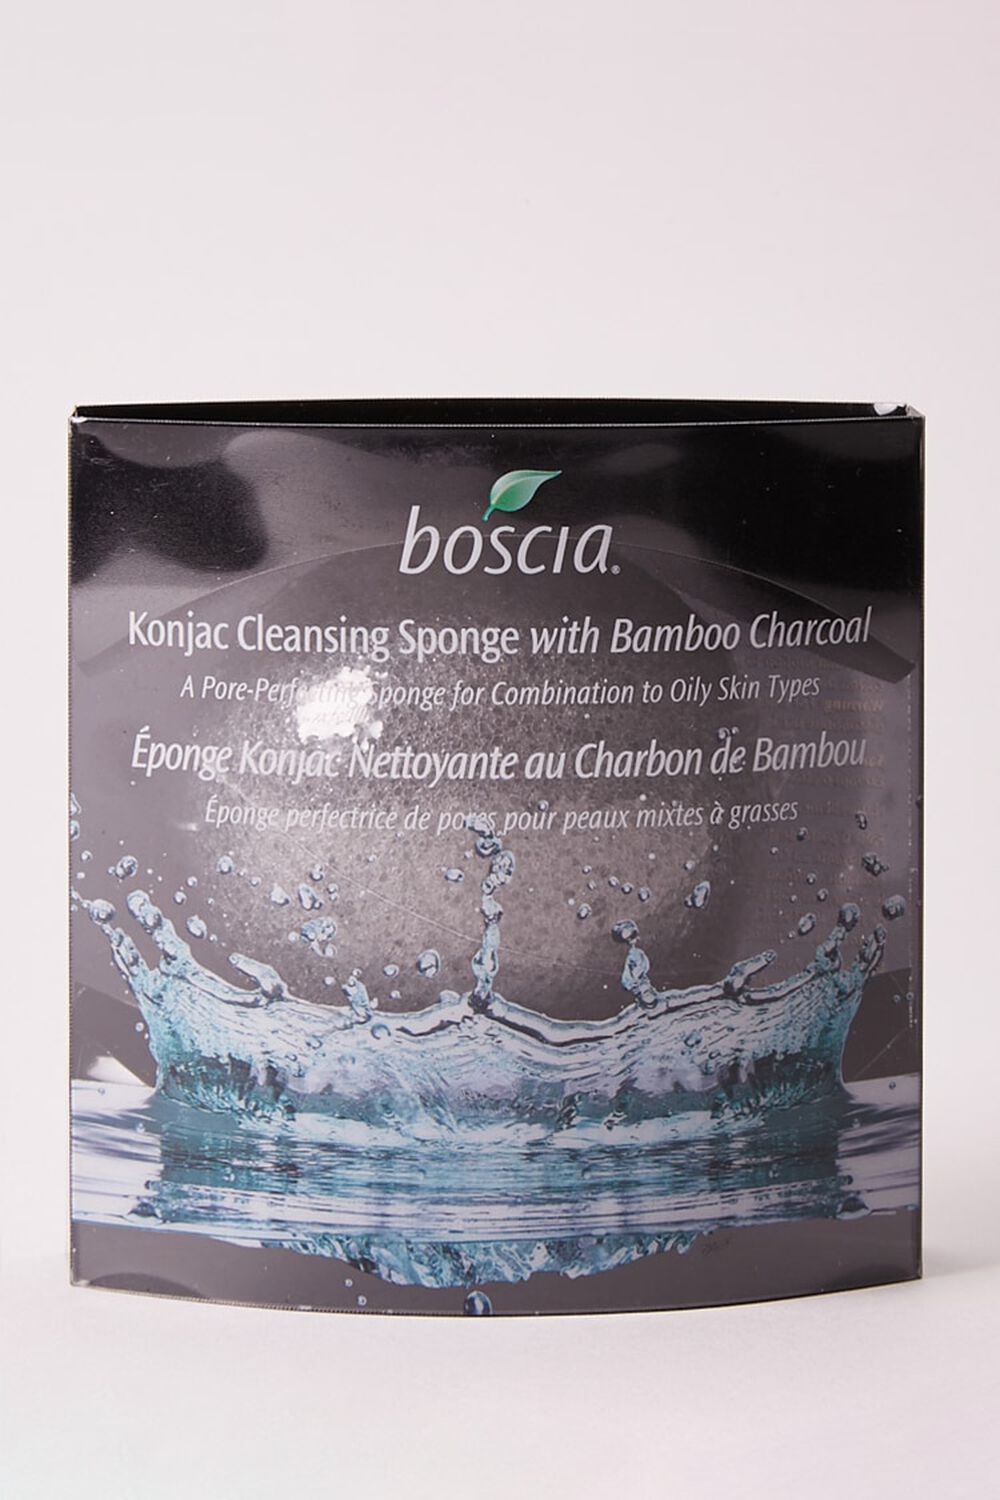 Konjac Cleansing Sponge with Bamboo Charcoal, image 2